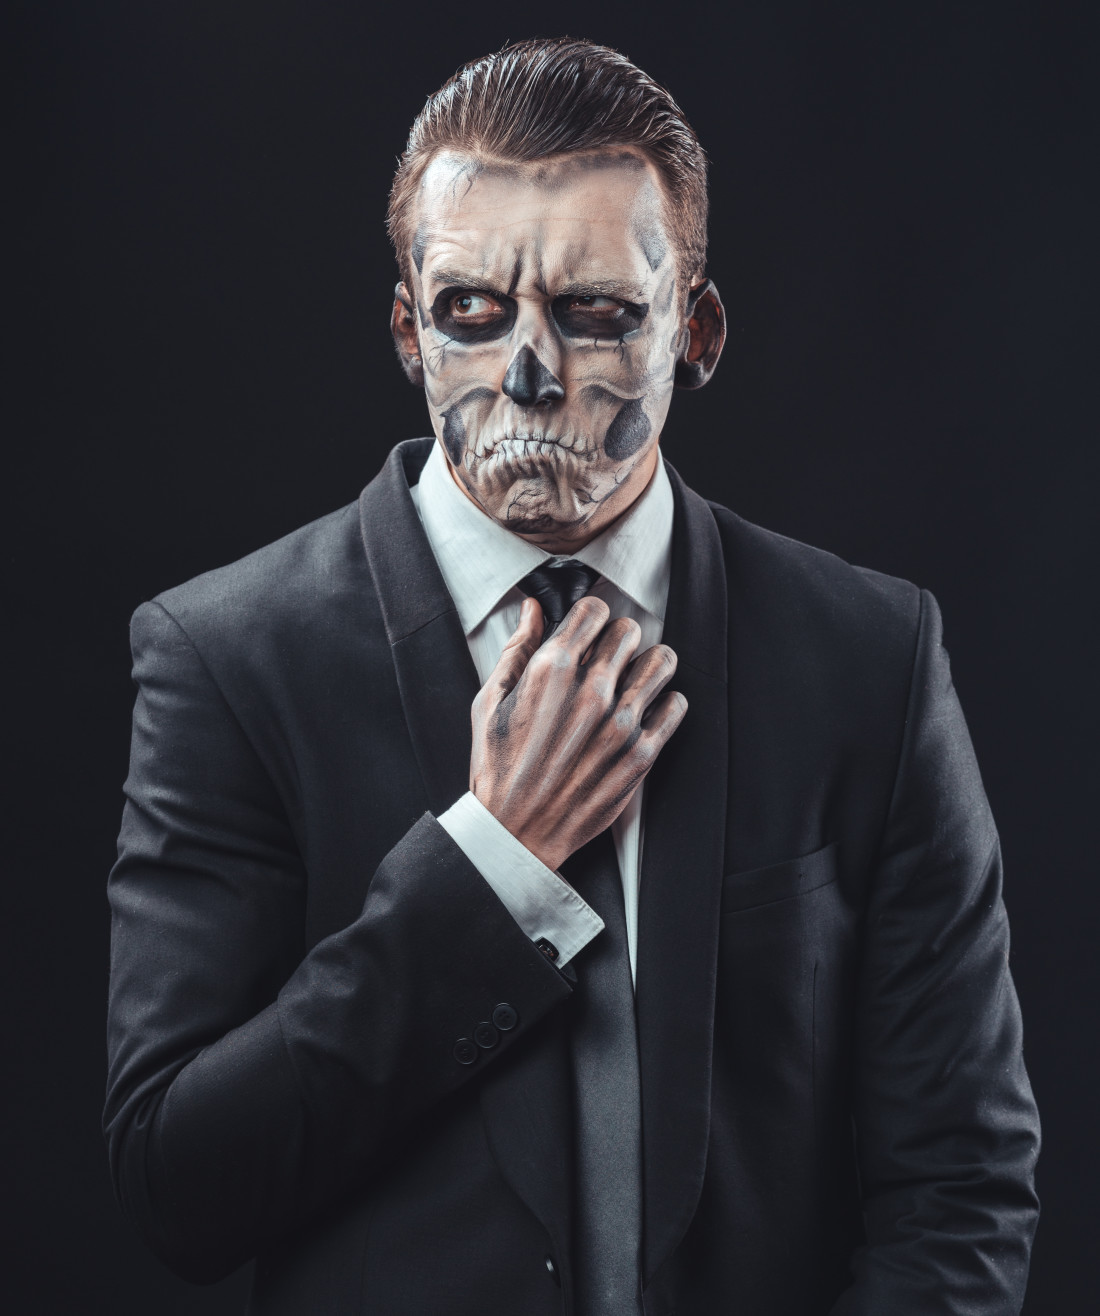 Business man with halloween make up